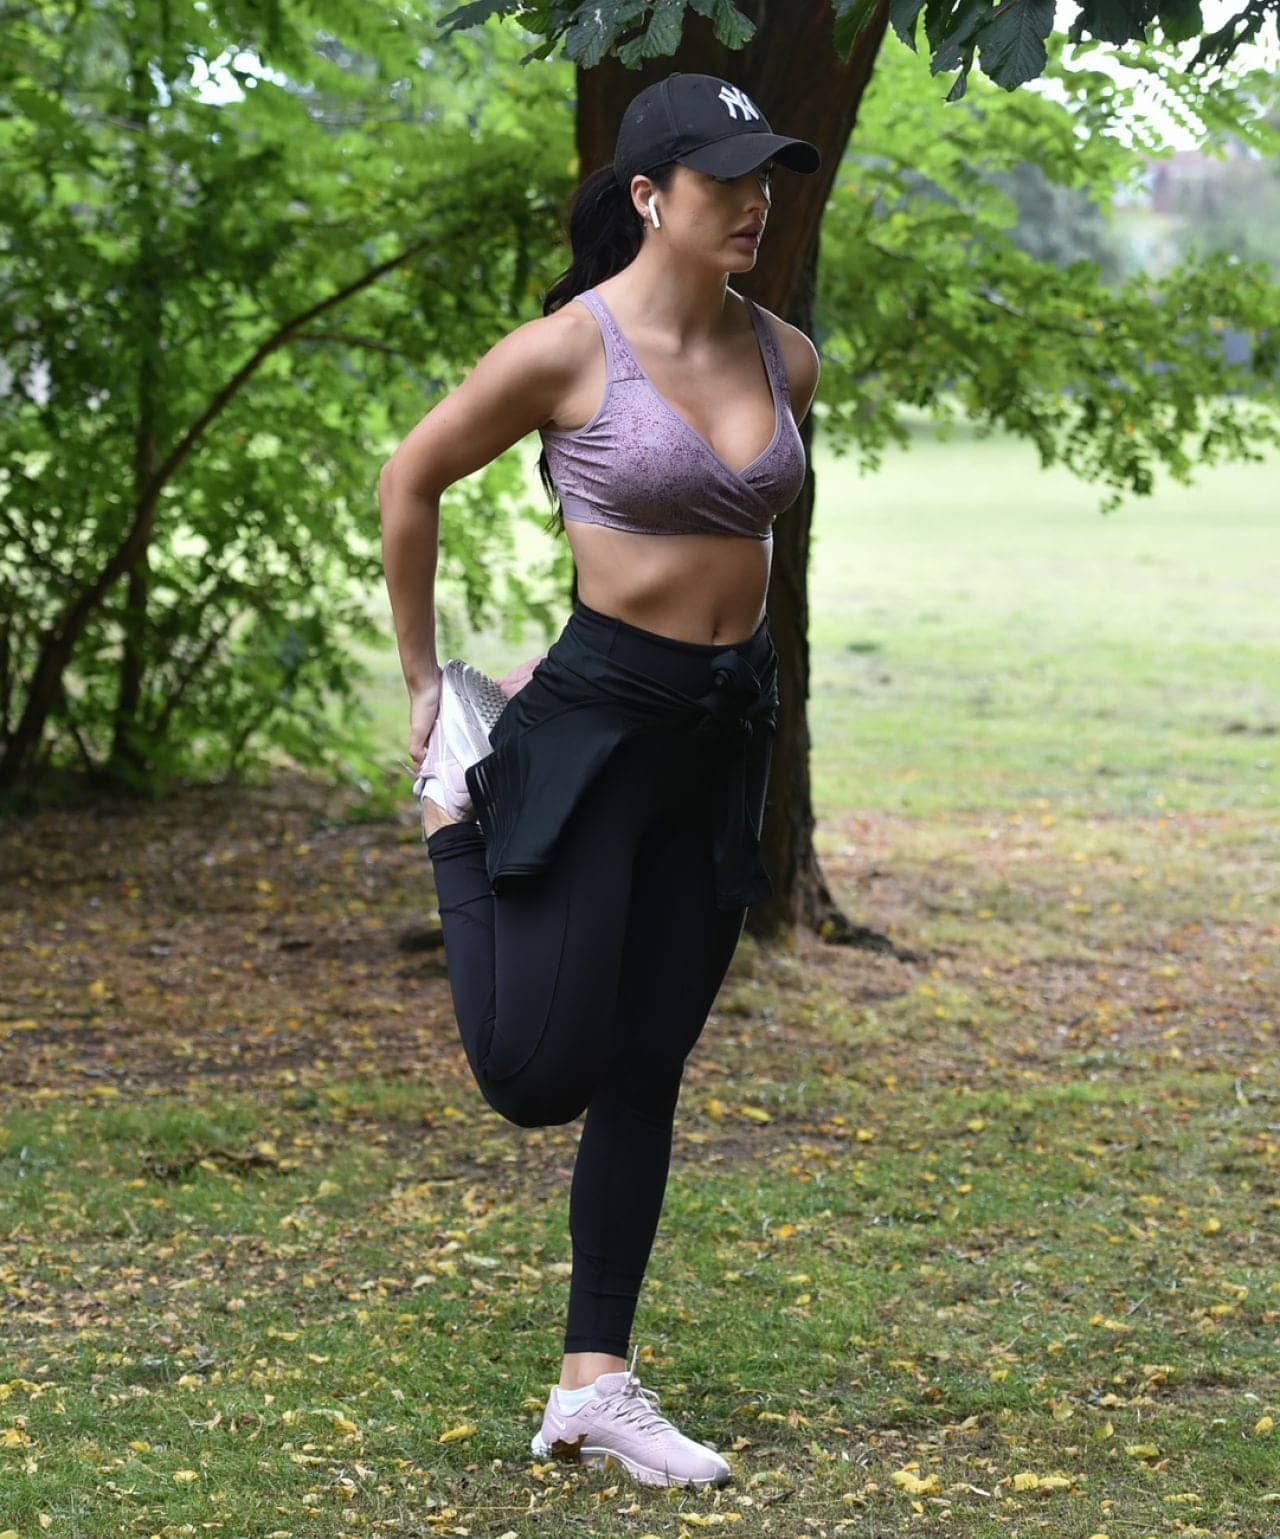 Busty Amy Day Working Out in Sports bra at Richmond Park 2021